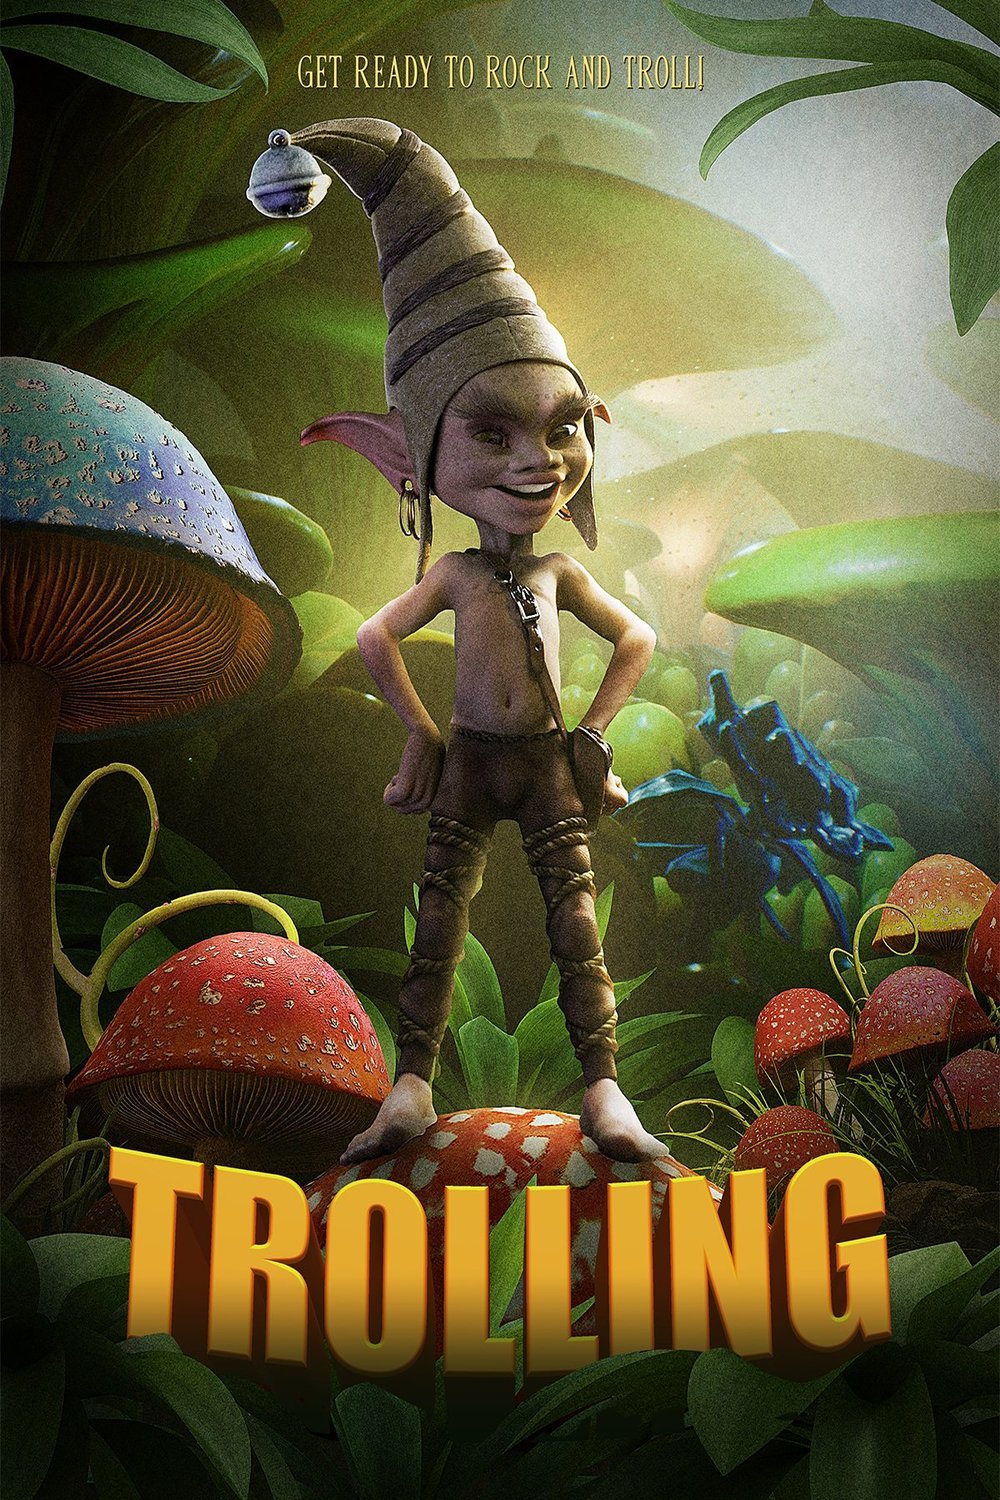 Poster of the movie Trolling